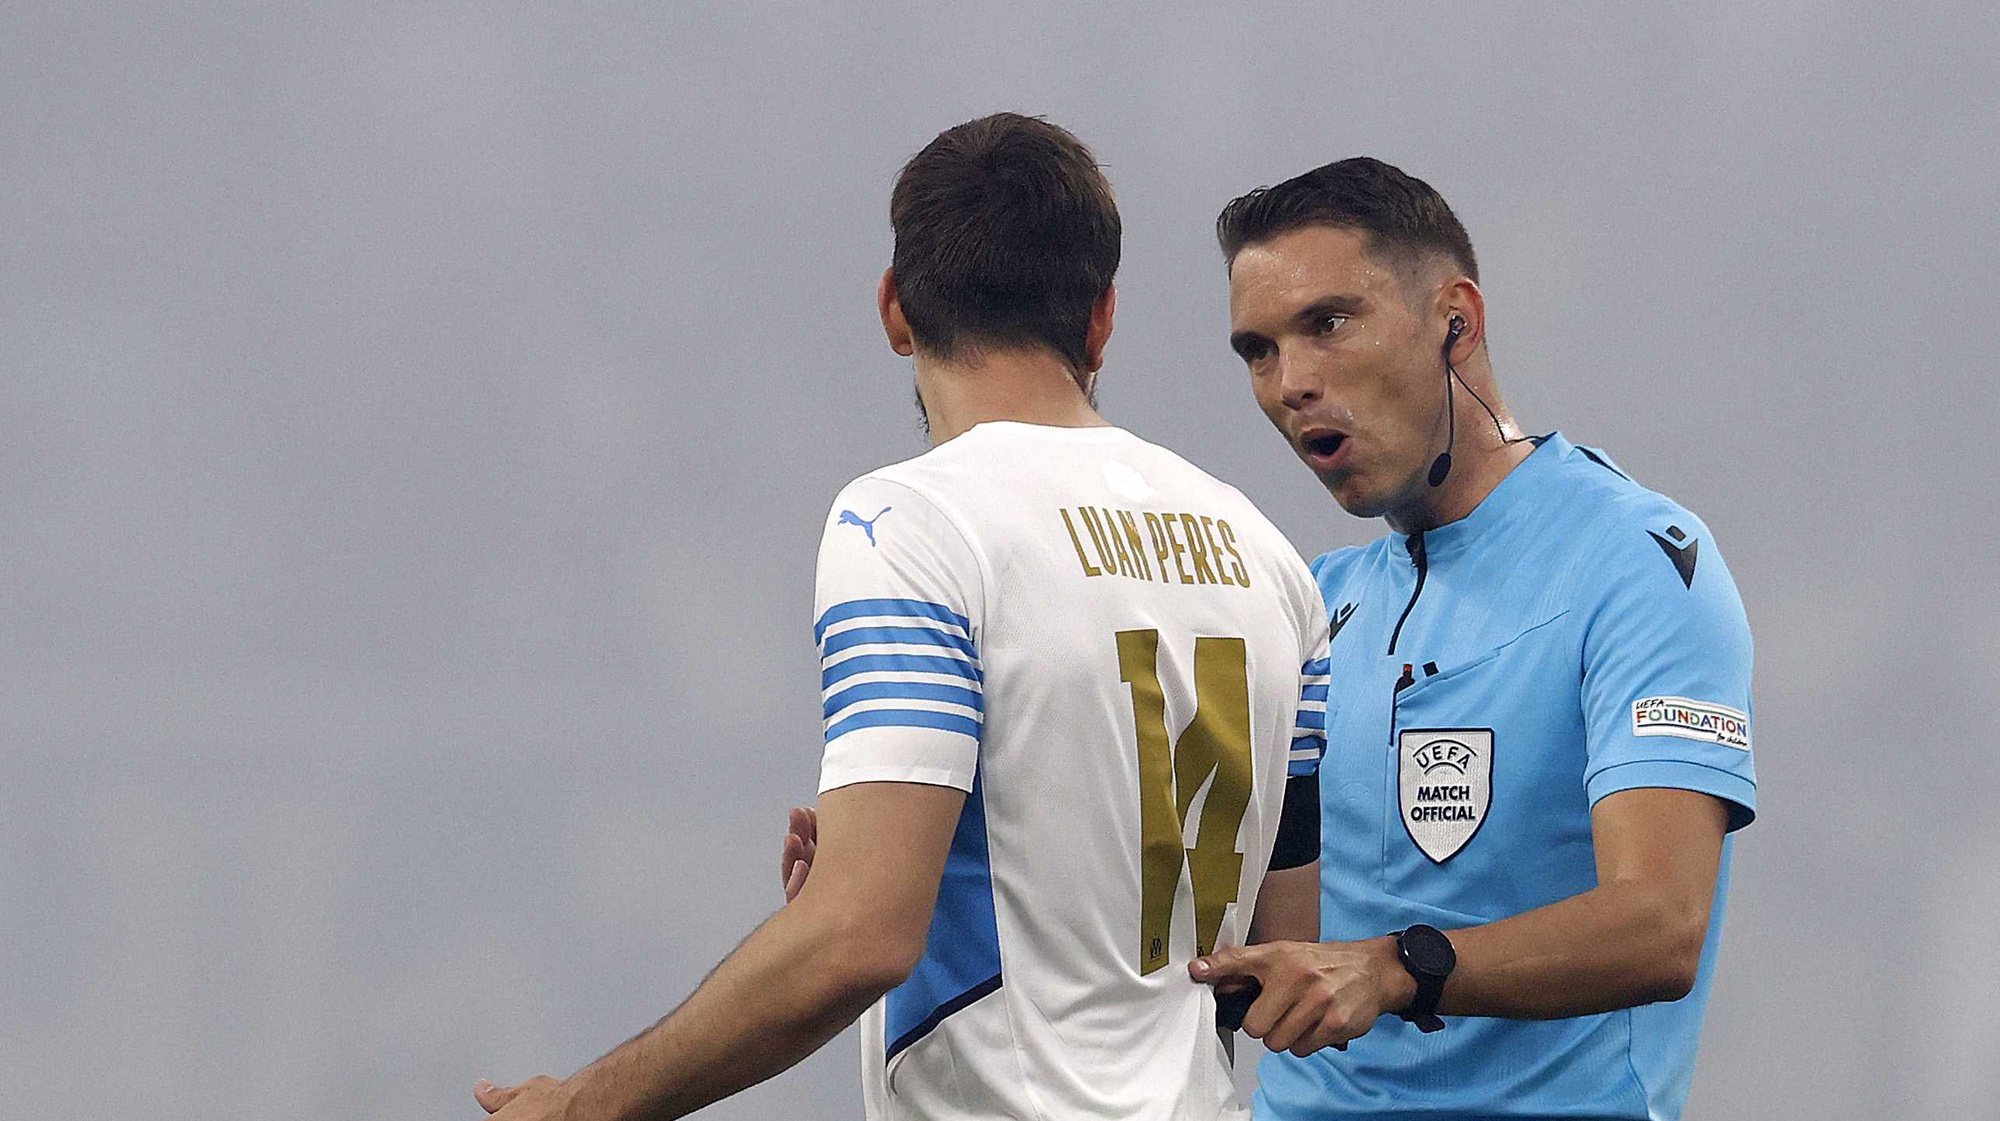 epa09929021 Luan Peres (L) of Olympique Marseille argues with referee Sandro Scharer during the UEFA Conference League semifinal, second leg soccer match between Olympique Marseille vs Feyenoord Rotterdam at Stade Velodrome in Marseille, France, 05 May 2022.  EPA/PIETER STAM DE JONGE